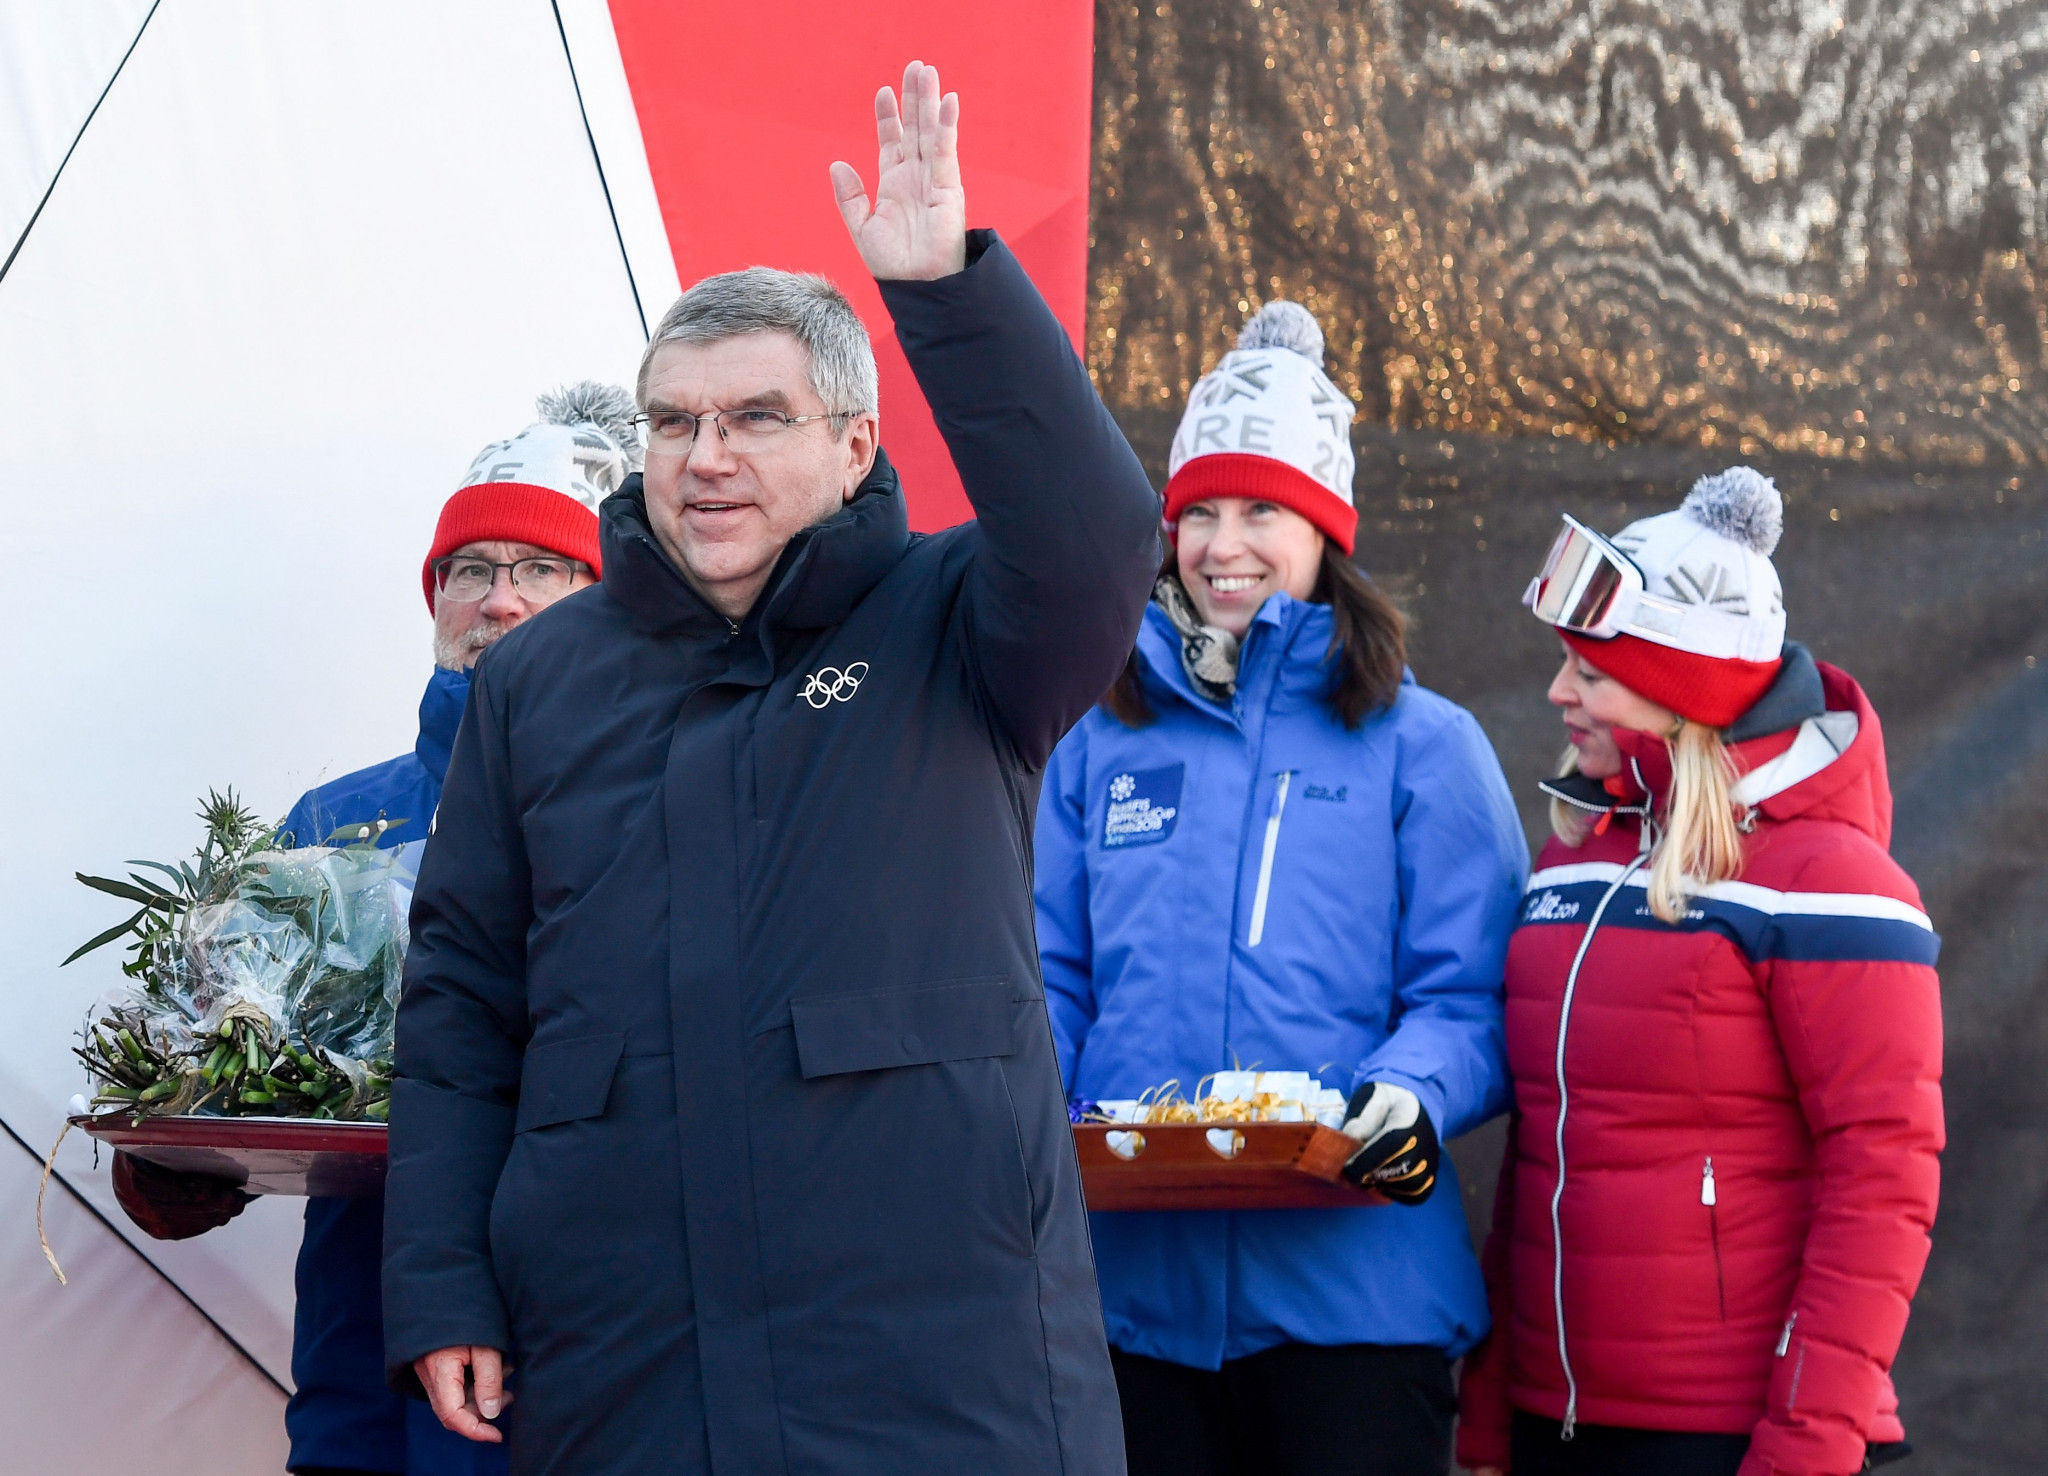 International Olympic Committee President Thomas Bach presented the medals ©Getty Images